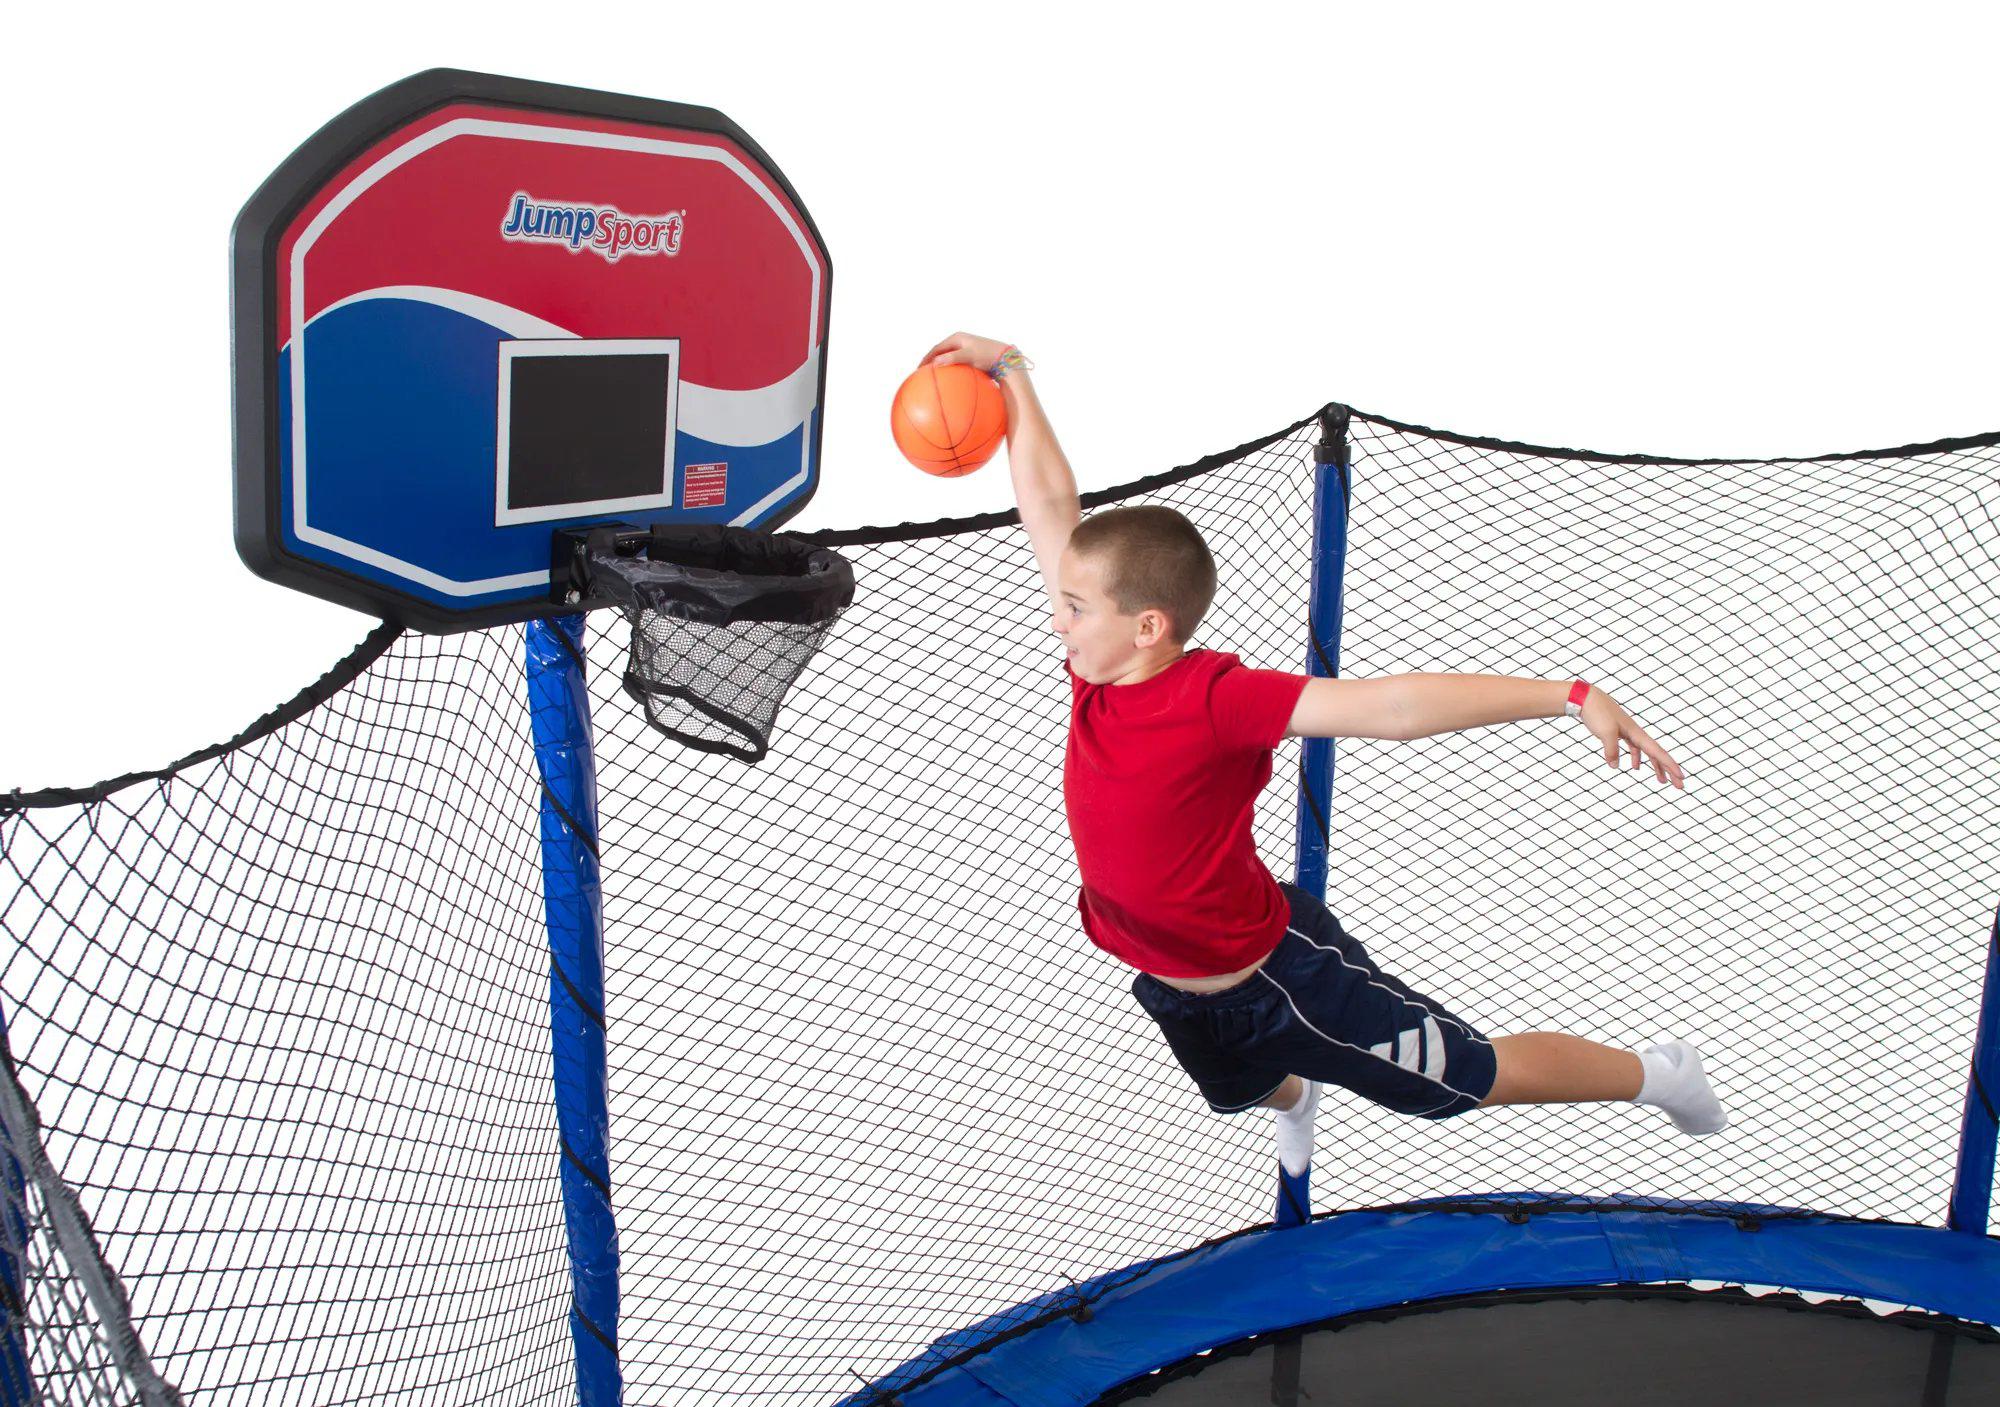 Slam dunk like a PRO with our flexible ProFlex rim!
Designed to fit securely on your JumpSport Tramp Happy Backyards Collierville (901)888-3523